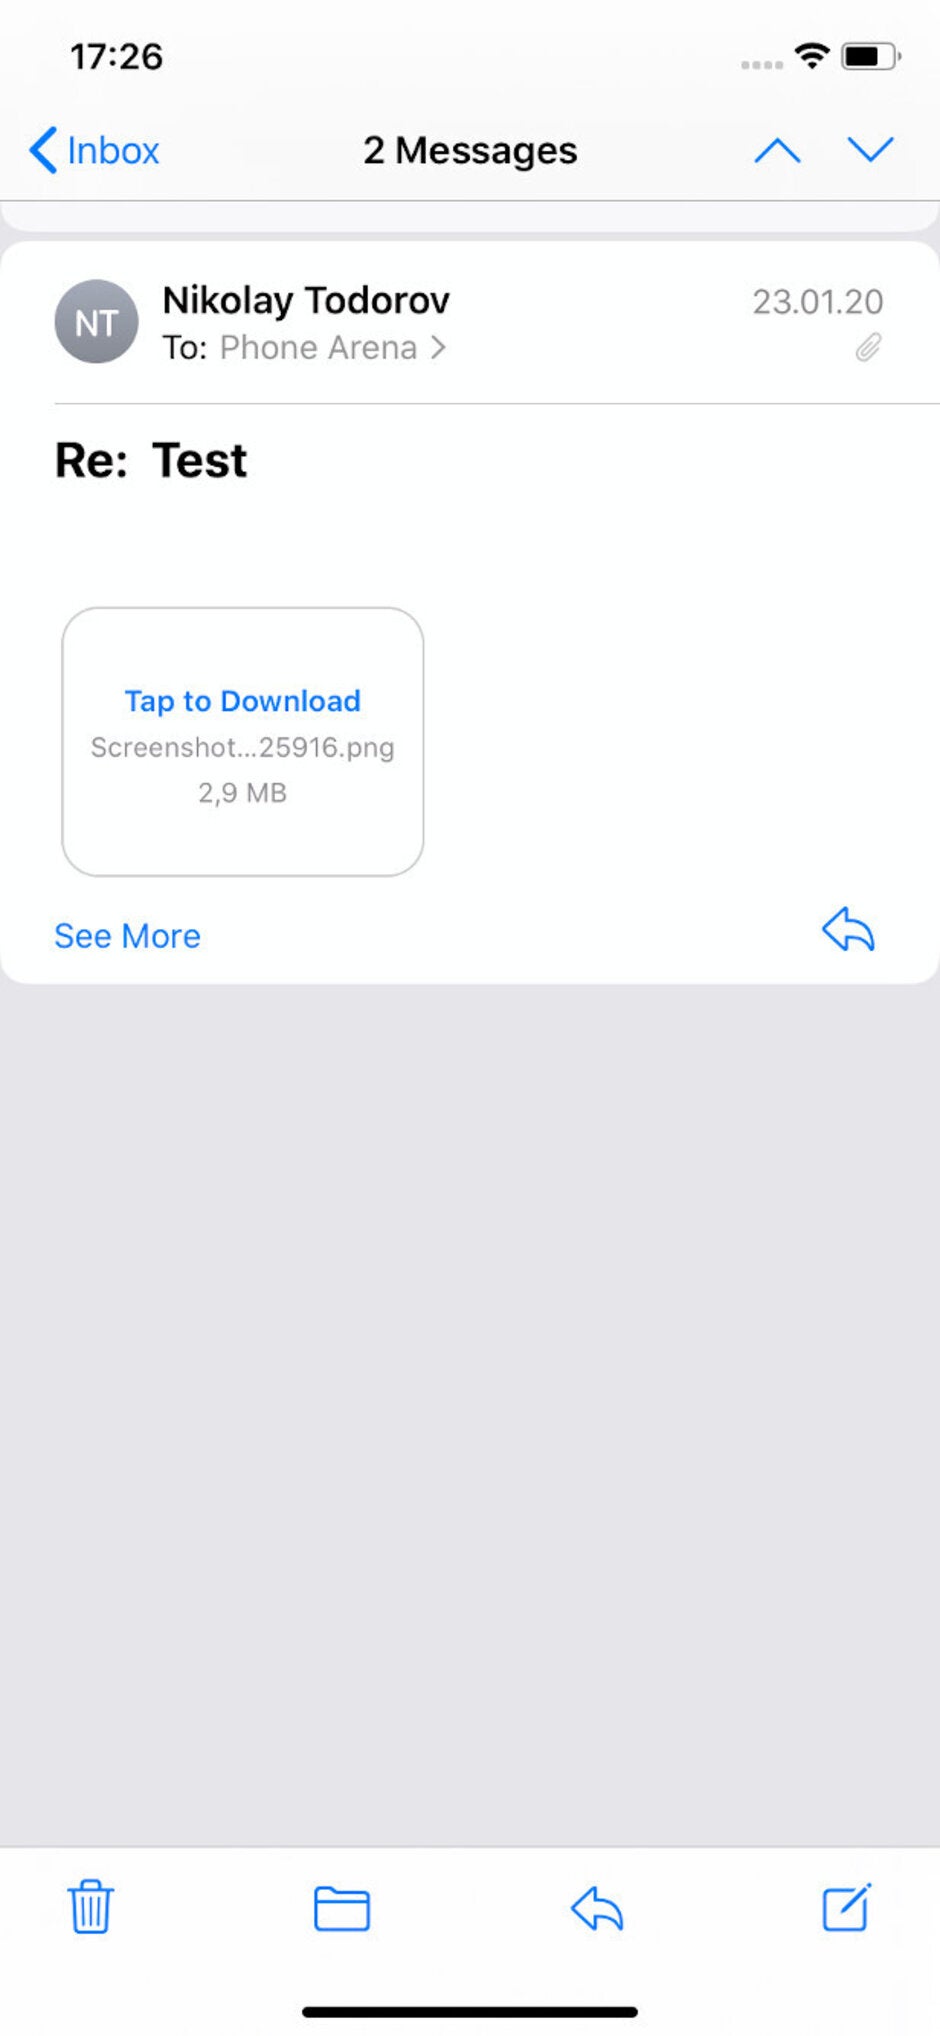 iOS 13.4 toolbar design - iOS 13.4 preview: internet recovery, Mail app redesign and others